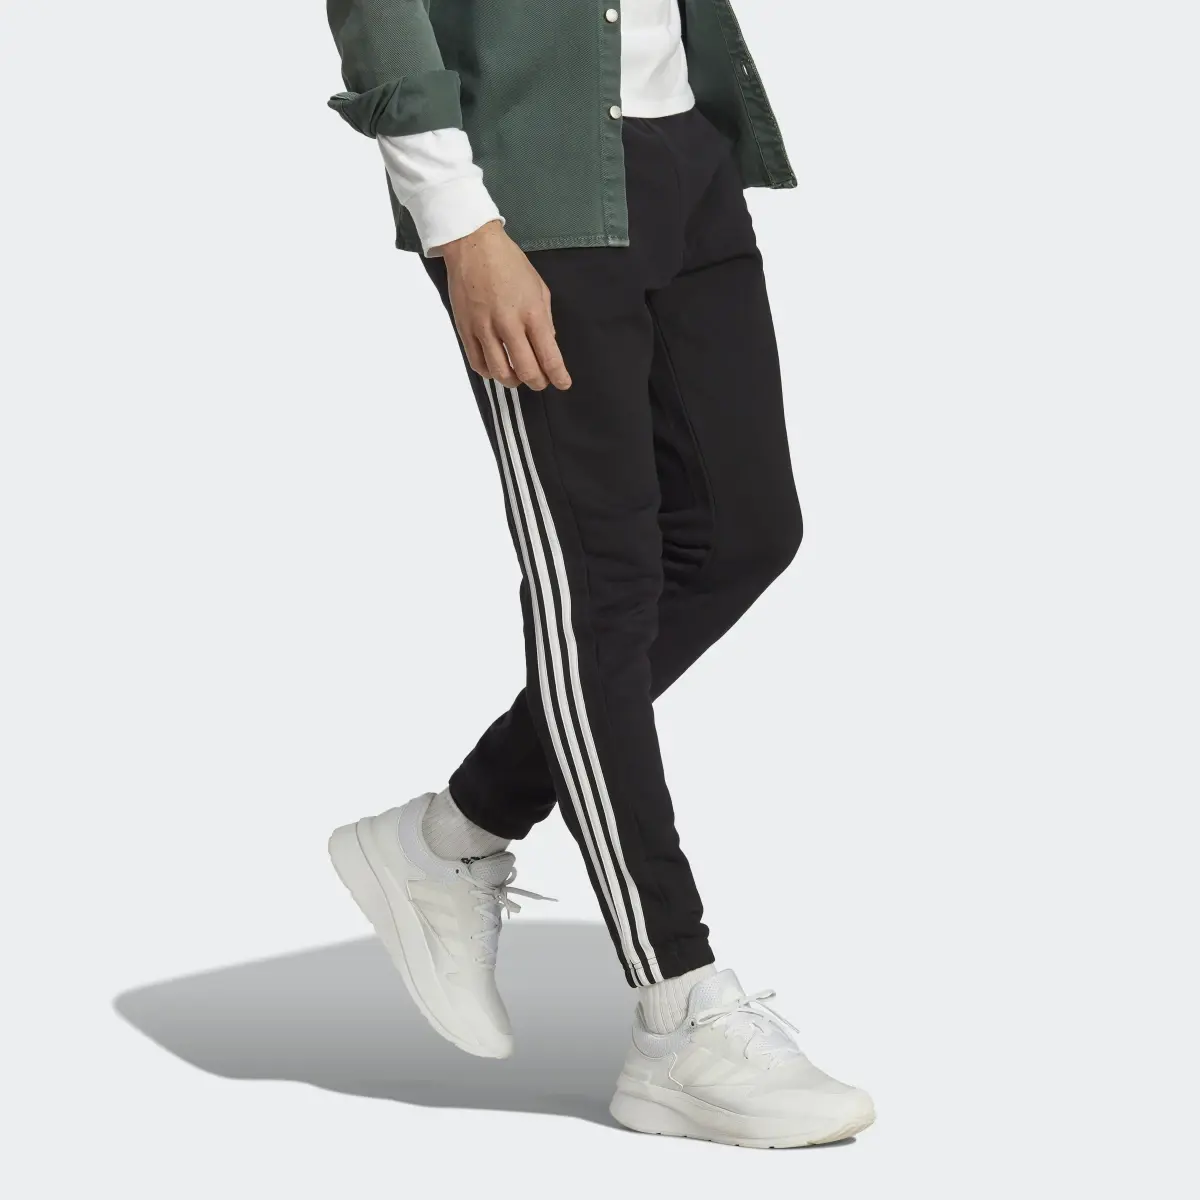 Adidas Essentials French Terry Tapered Elastic Cuff 3-Stripes Joggers. 3